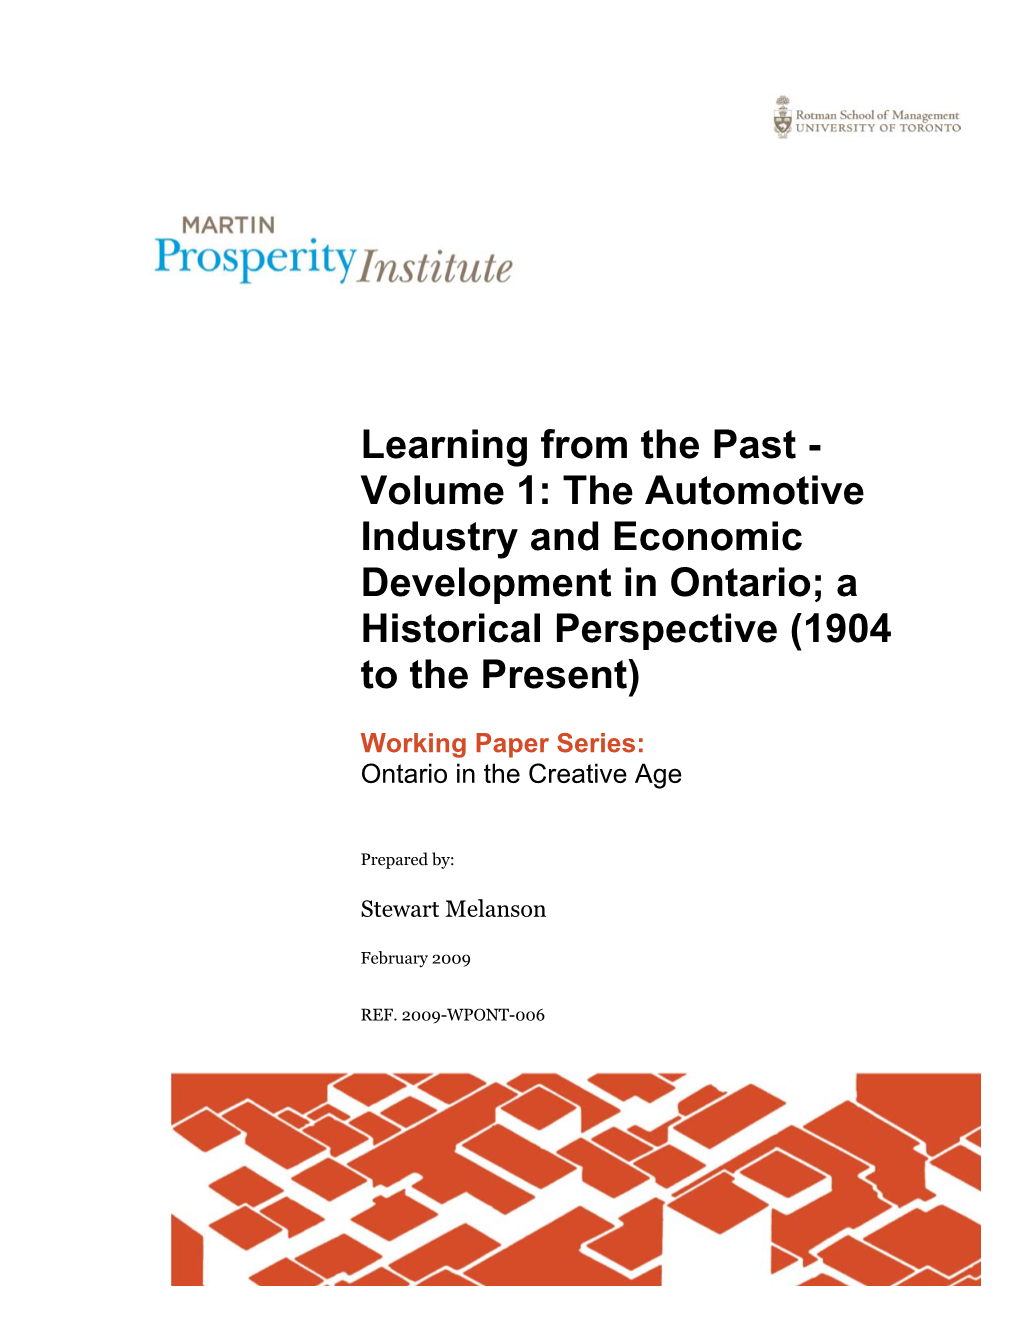 Learning from the Past - Volume 1: the Automotive Industry and Economic Development in Ontario; a Historical Perspective (1904 to the Present)